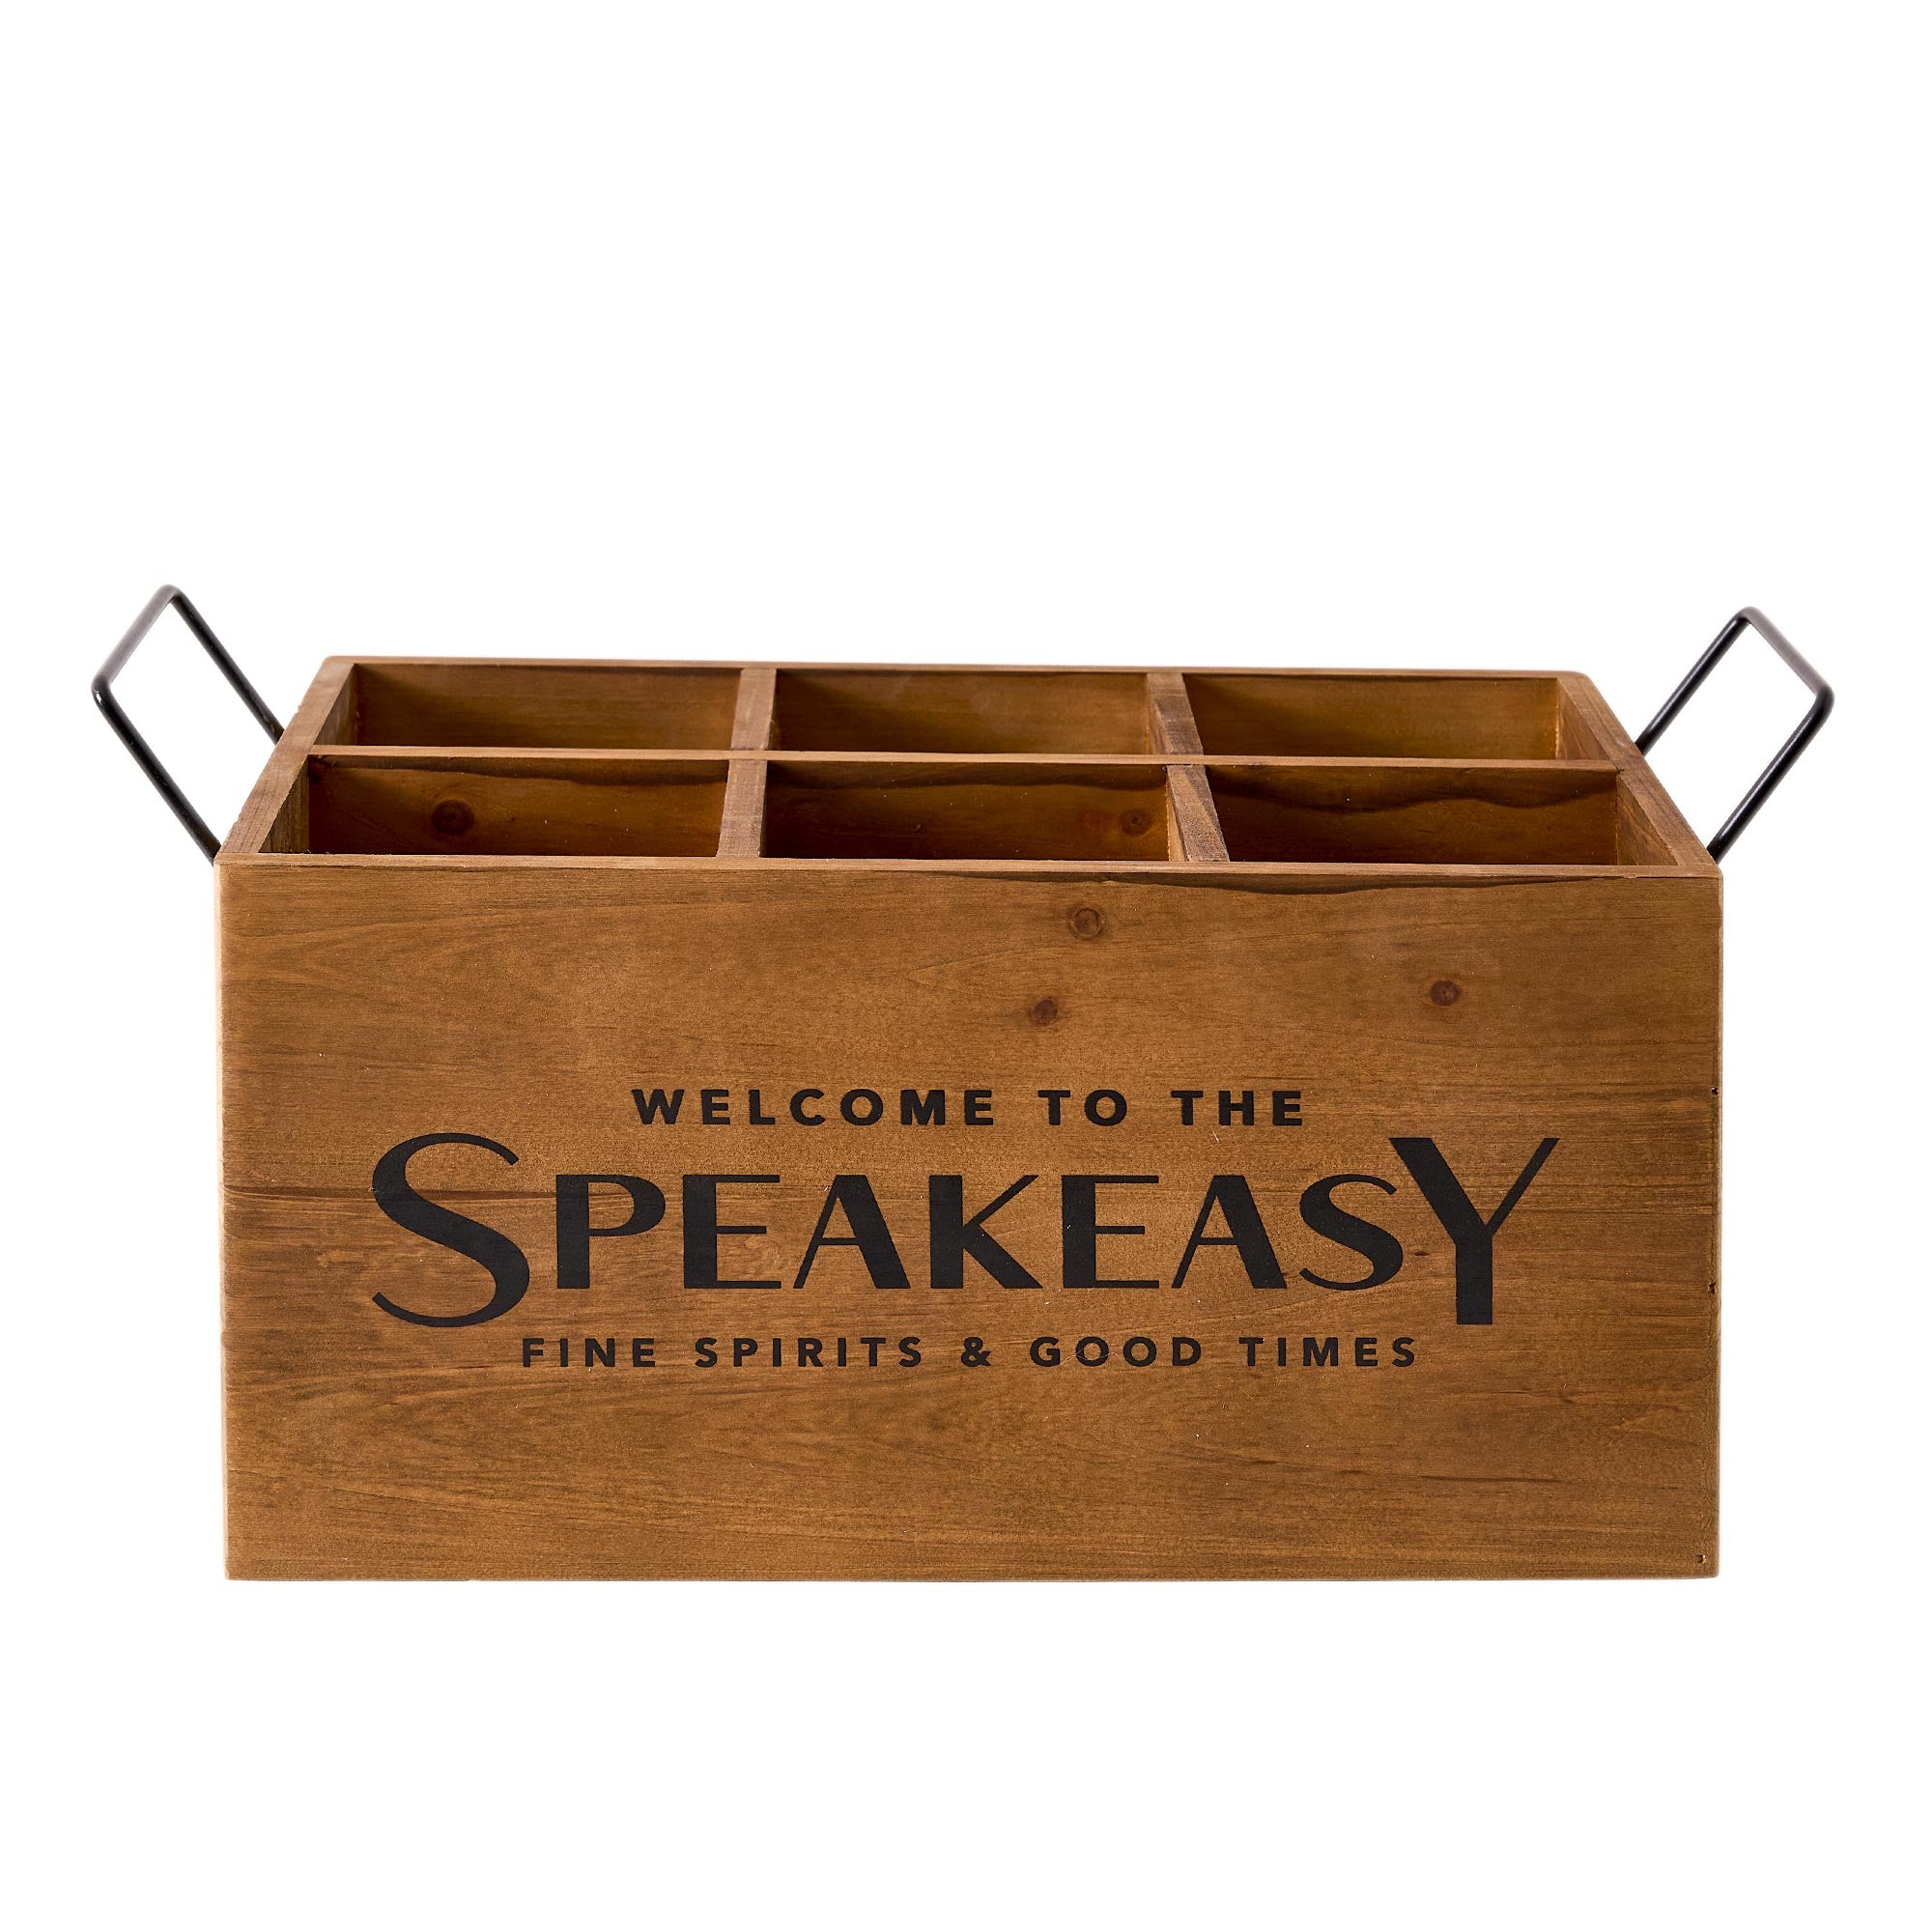 The Speakeasy Wood Crate Bottle Holder with Metal Handles - 7